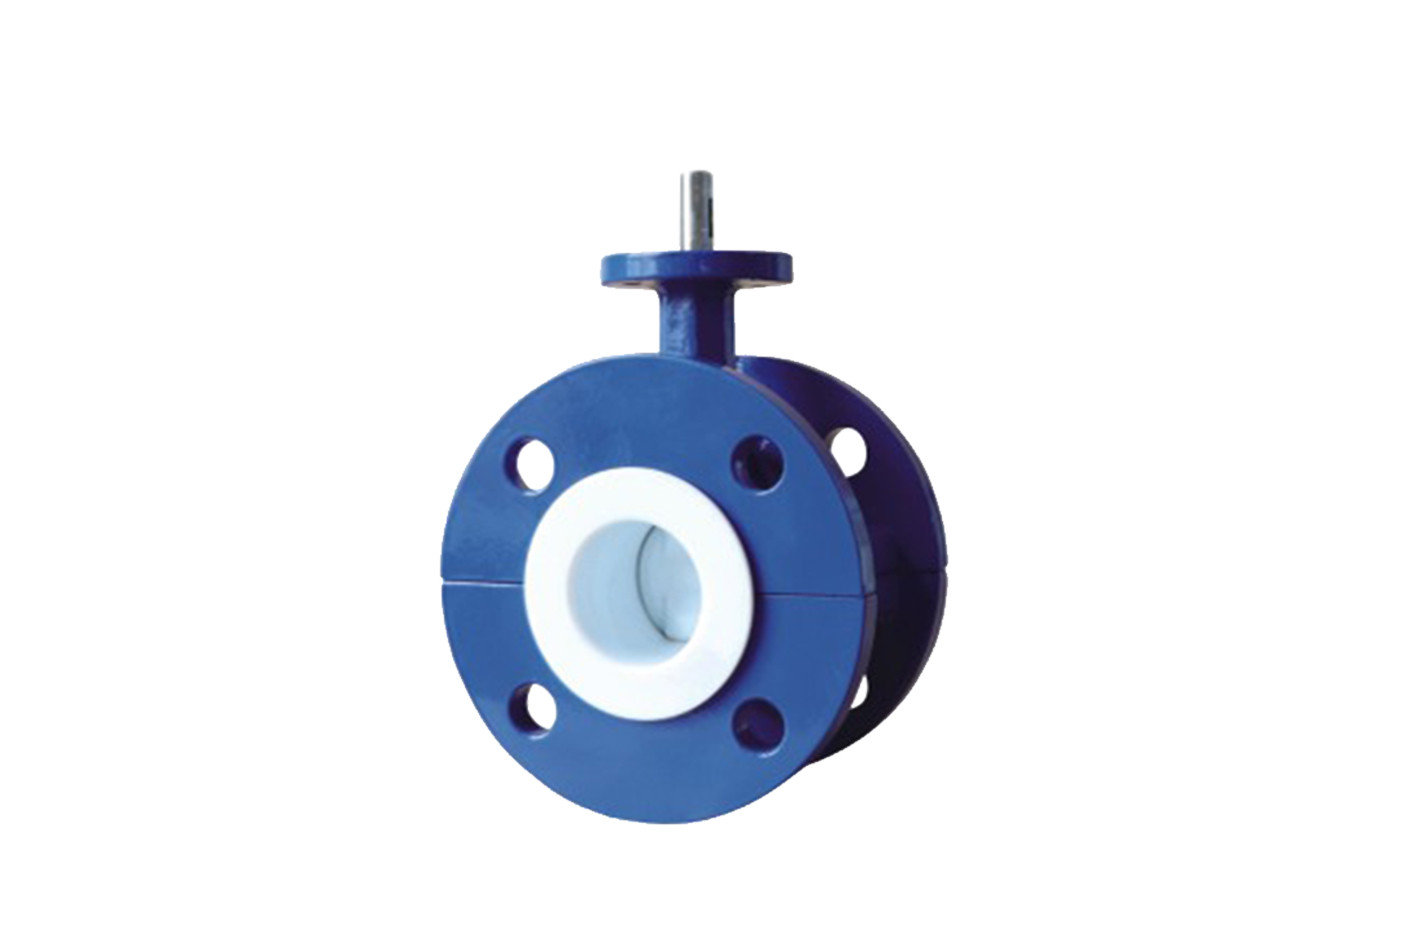  Blue Flanged PTFE Lined Butterfly Valve , Worm Gear Operated Butterfly Valve Manufactures